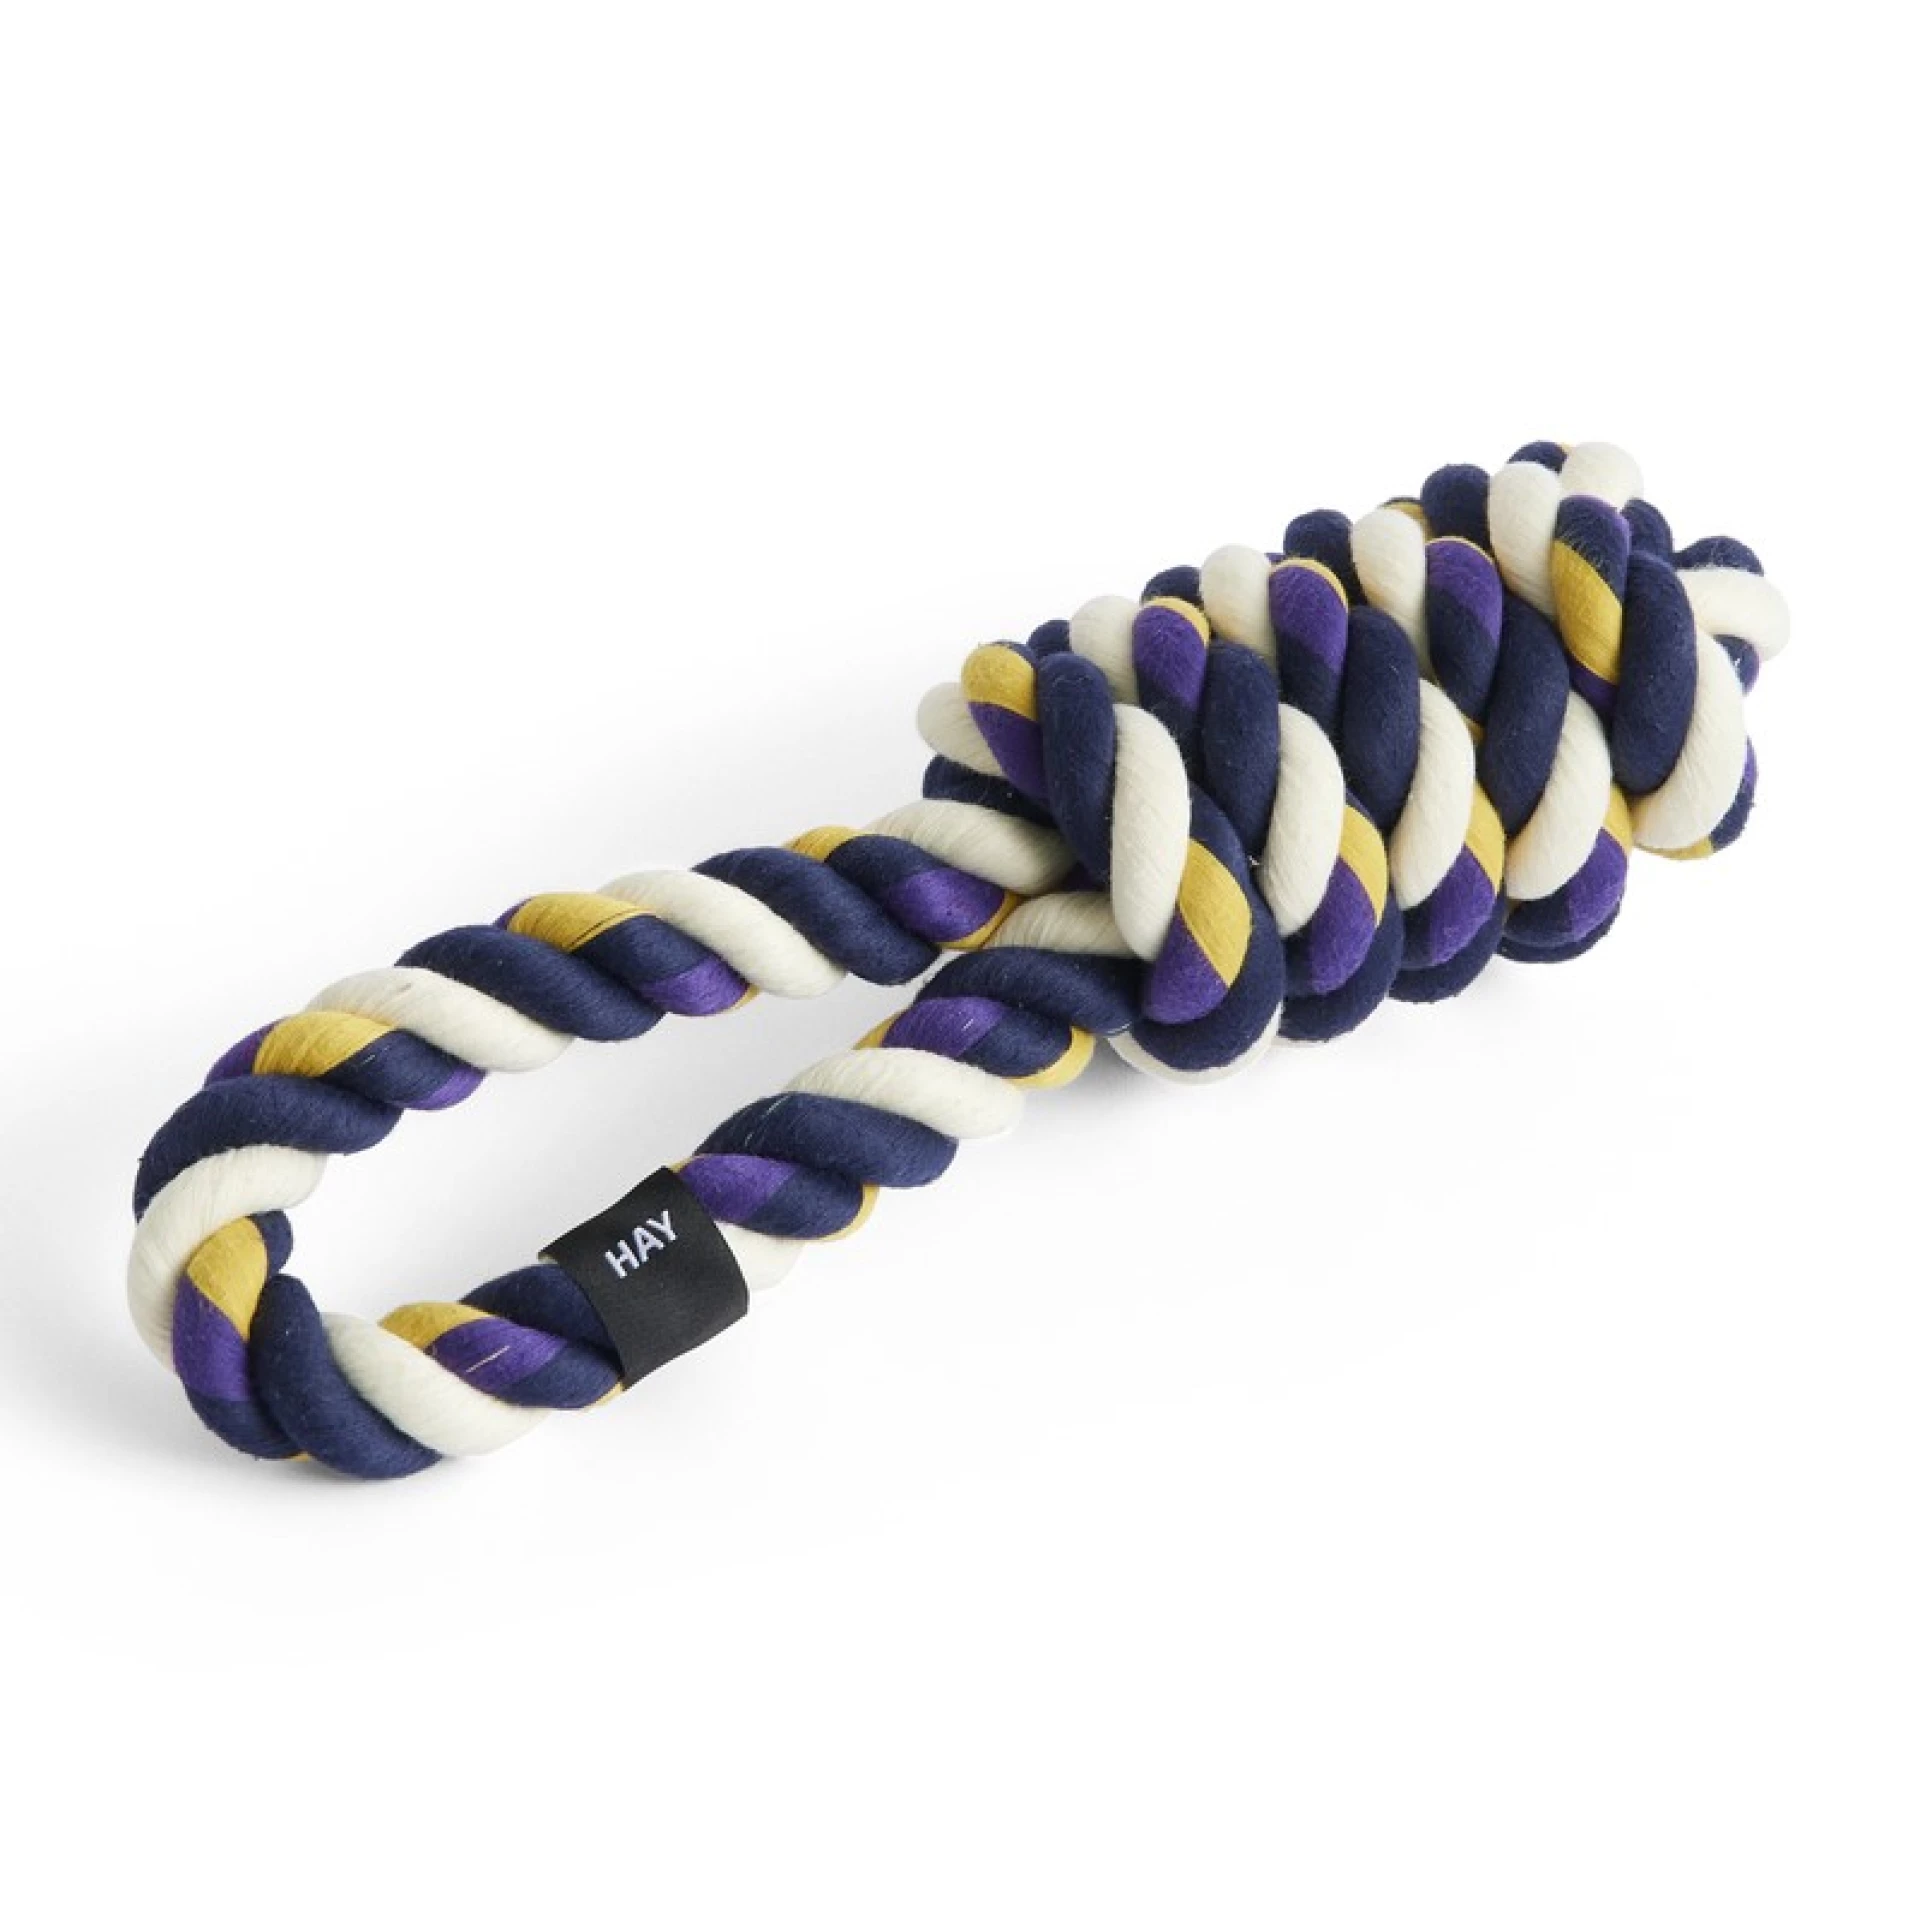 hay-blue-purple-and-ochre-dogs-rope-toy